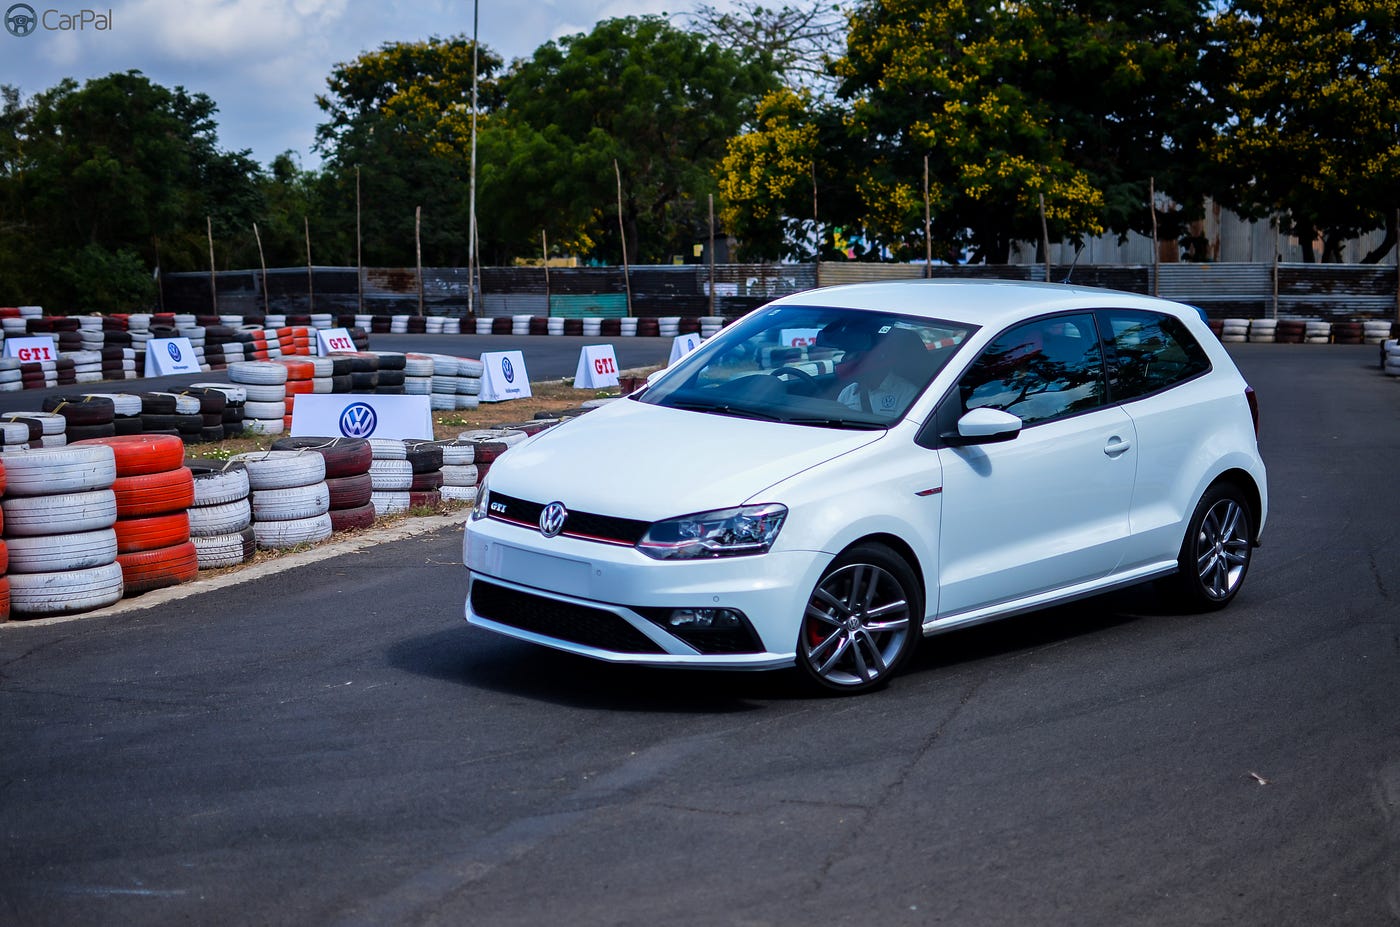 Polo GTI: The hottest hatch around - India Today